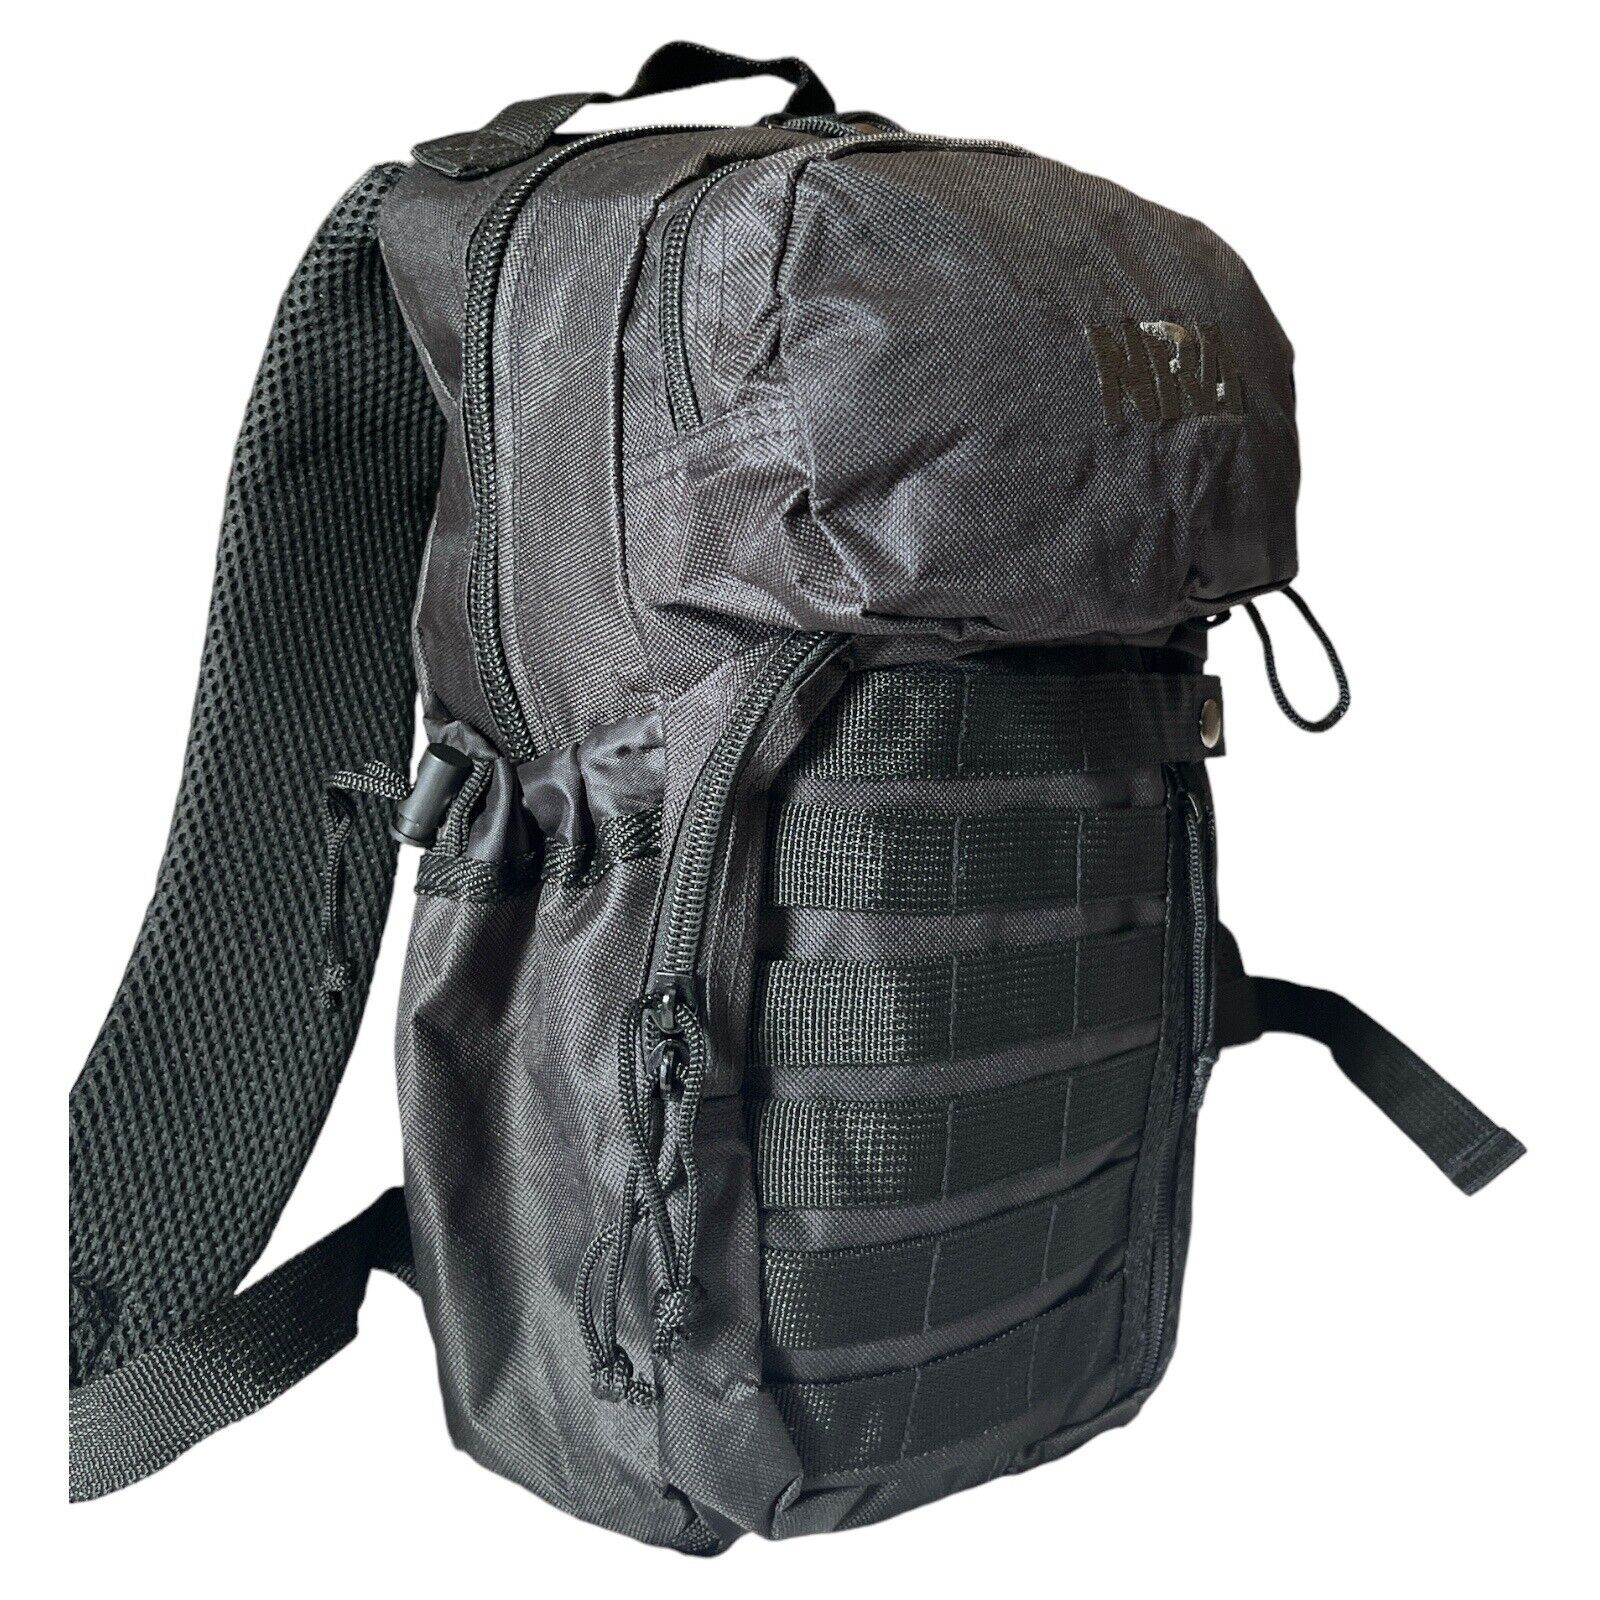 Black NRA Hunting/Tactical Bag Backpack W/ Multiple Zippered Pockets Compartment